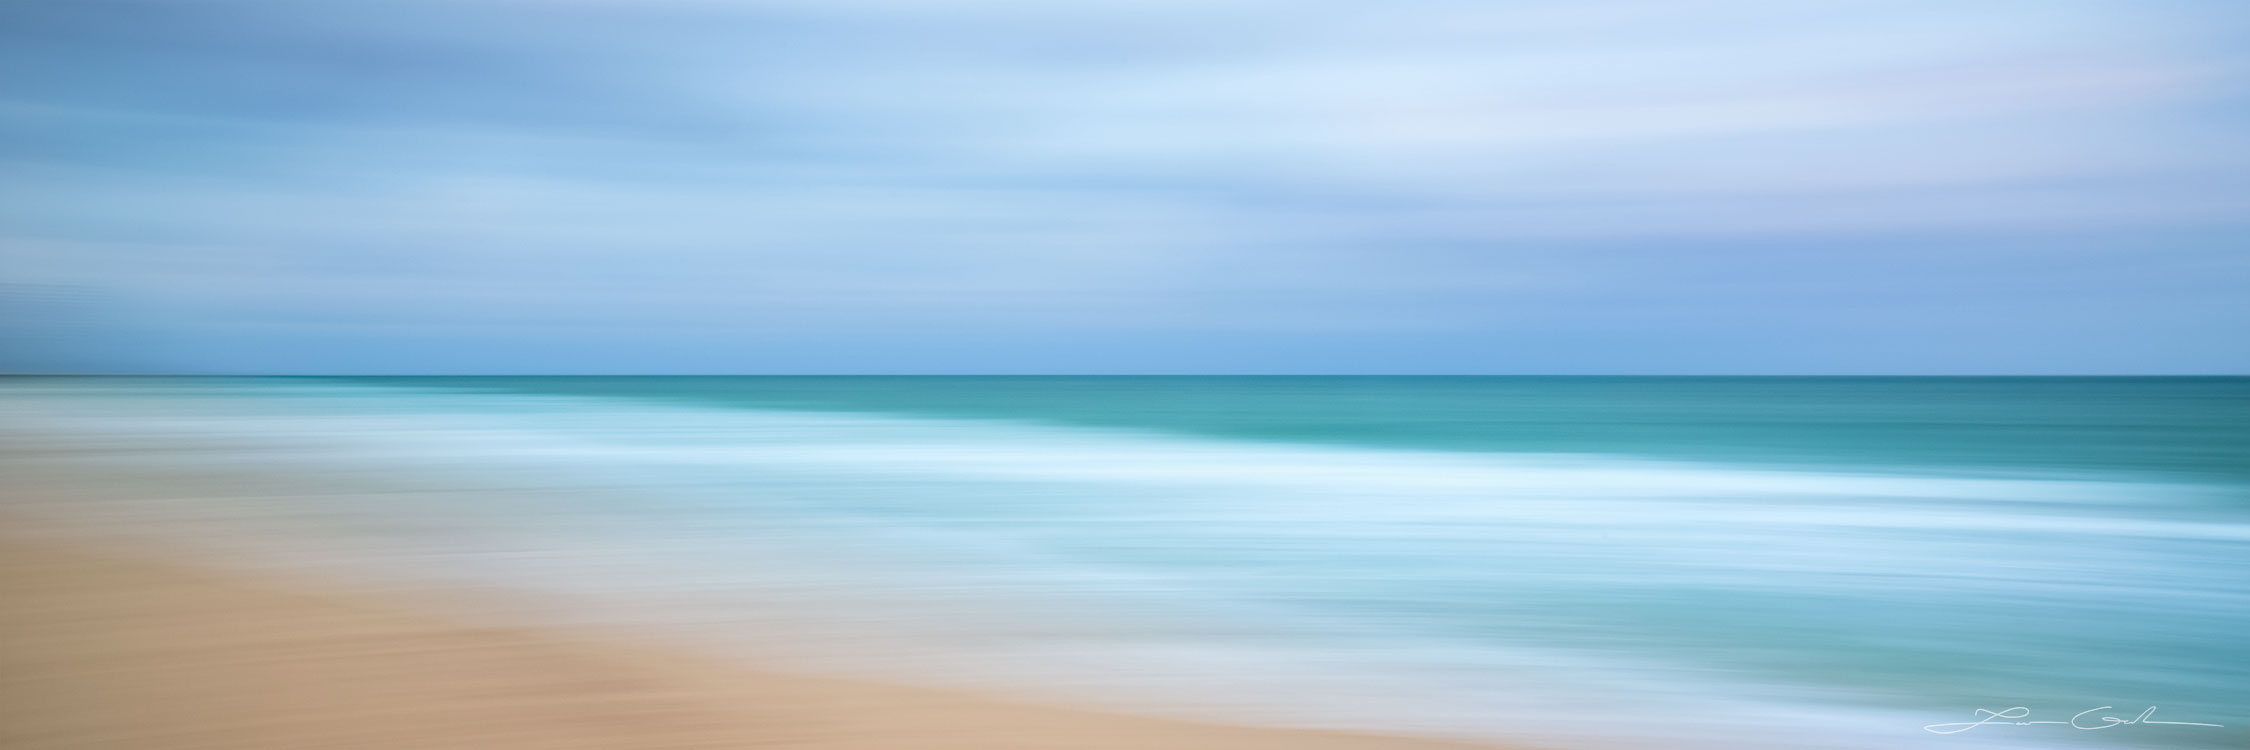 Blue ocean abstract panorama with white clouds and white waves - Gintchin Fine Art